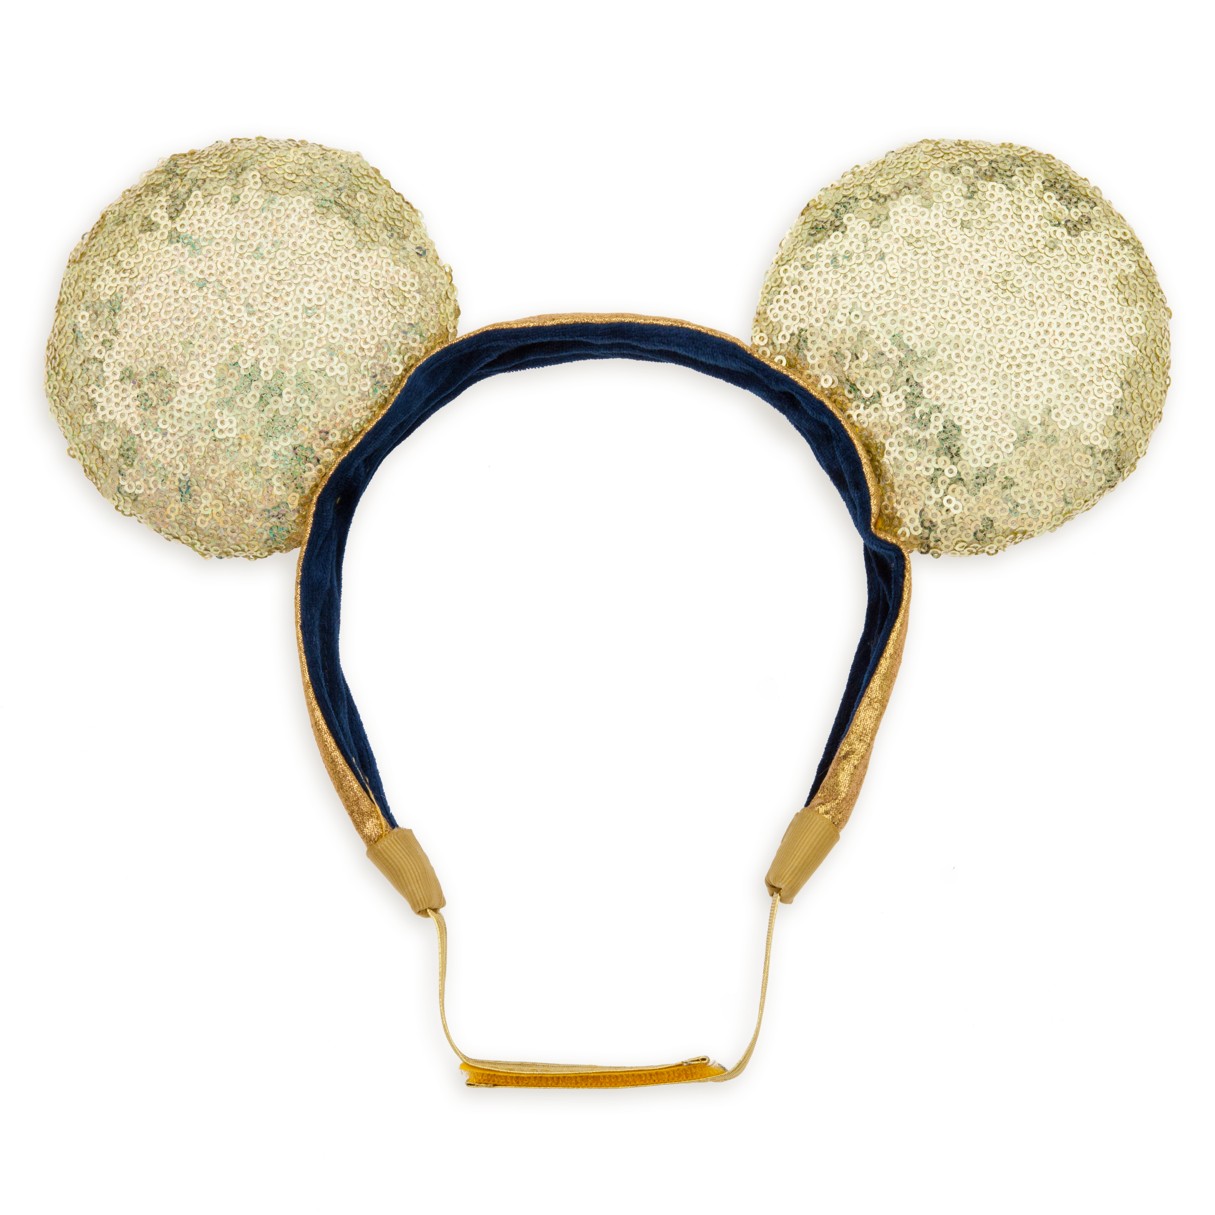 Minnie Mouse Gold Sequin Ear Headband with Strap for Adults – Walt Disney World 50th Anniversary